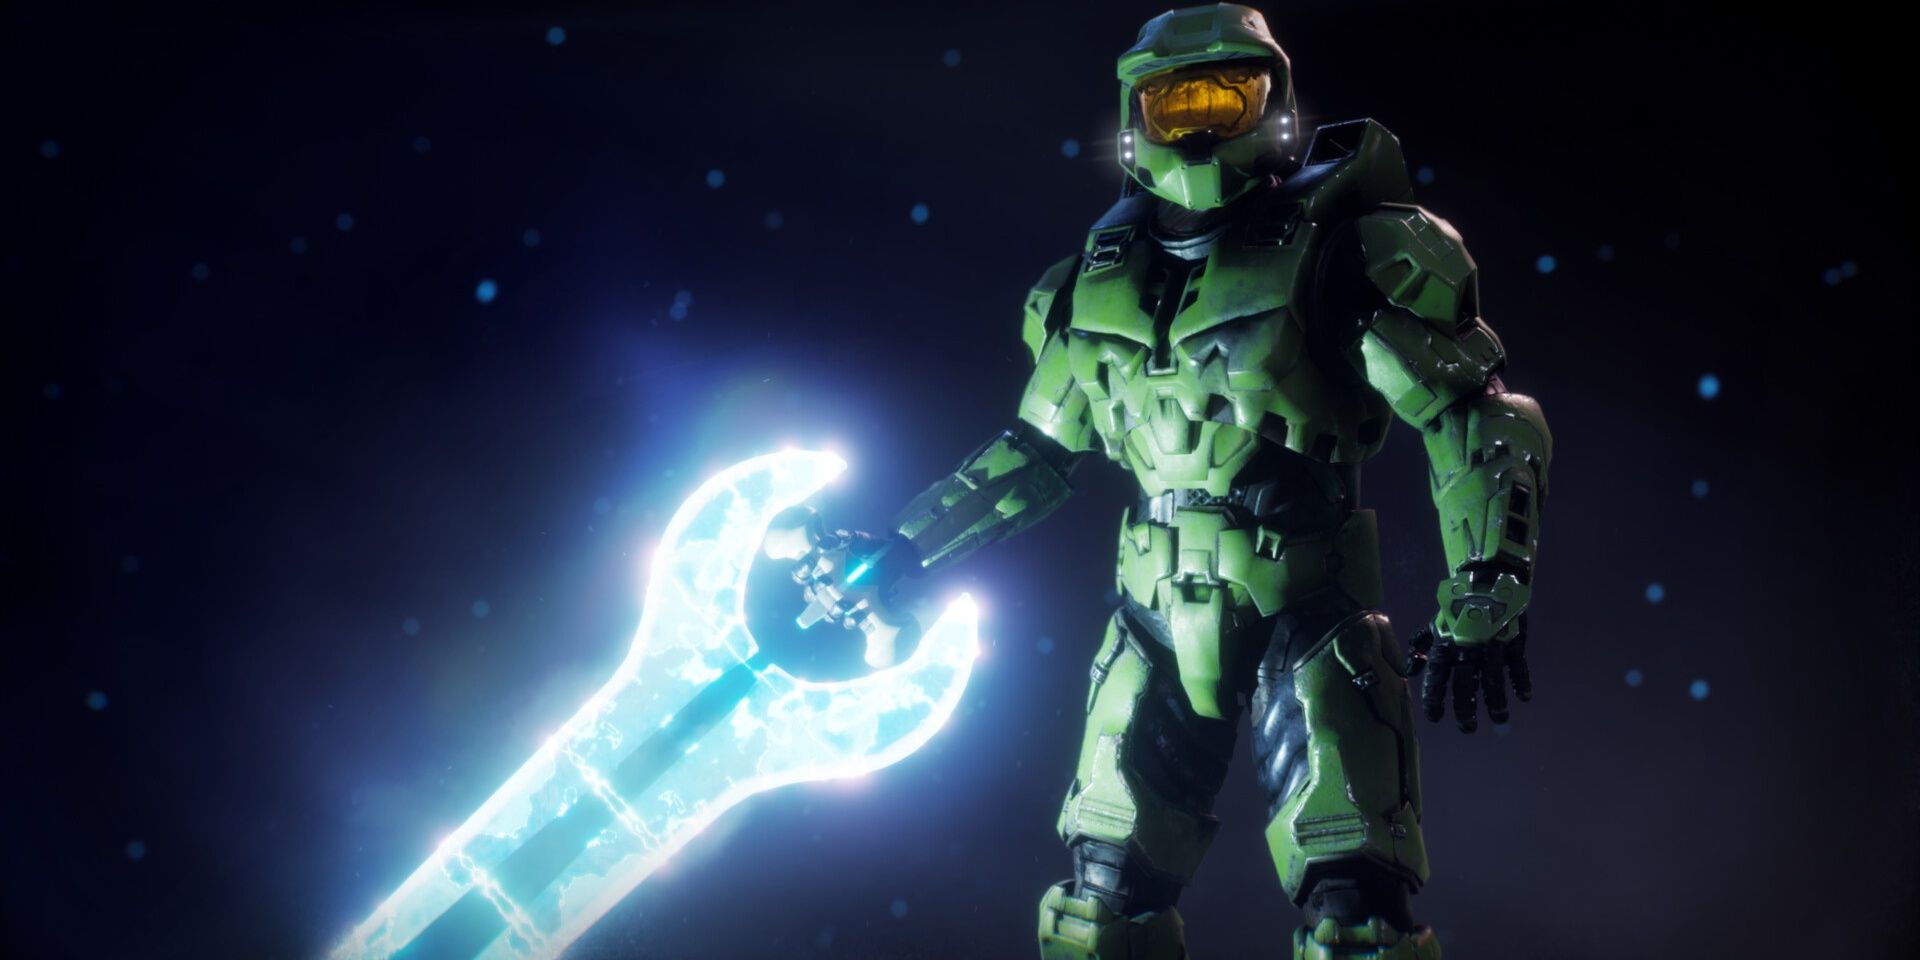 Infinite Master Chief brandishing an activated glowing energy sword